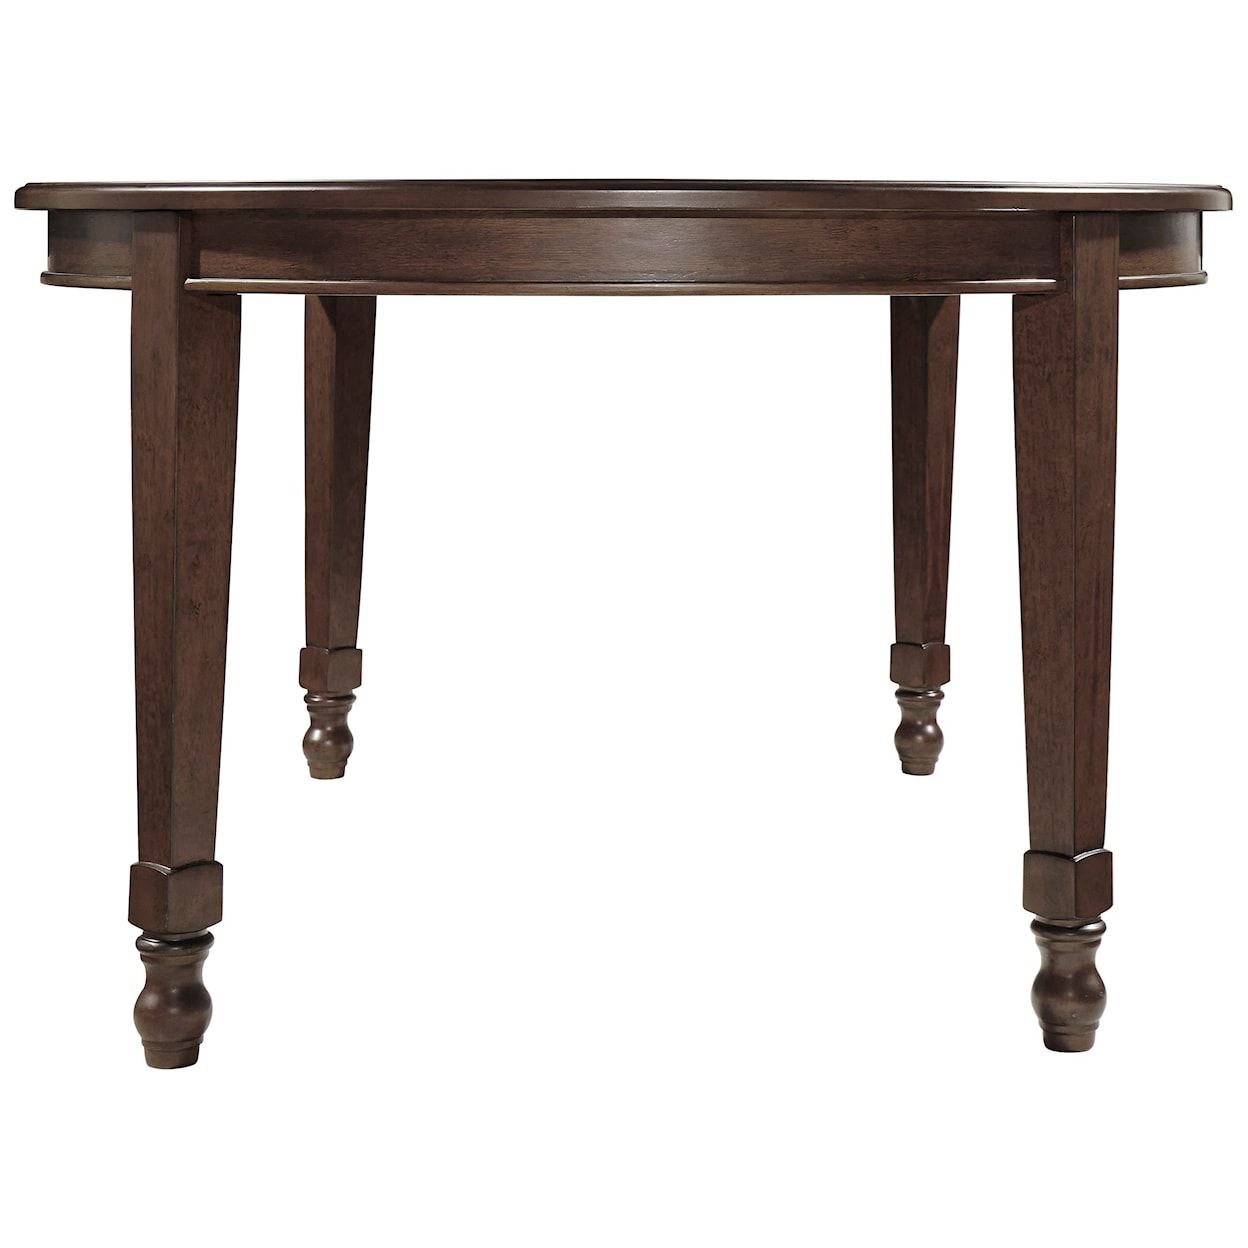 Ashley Signature Design Adinton Oval Dining Room Extension Table